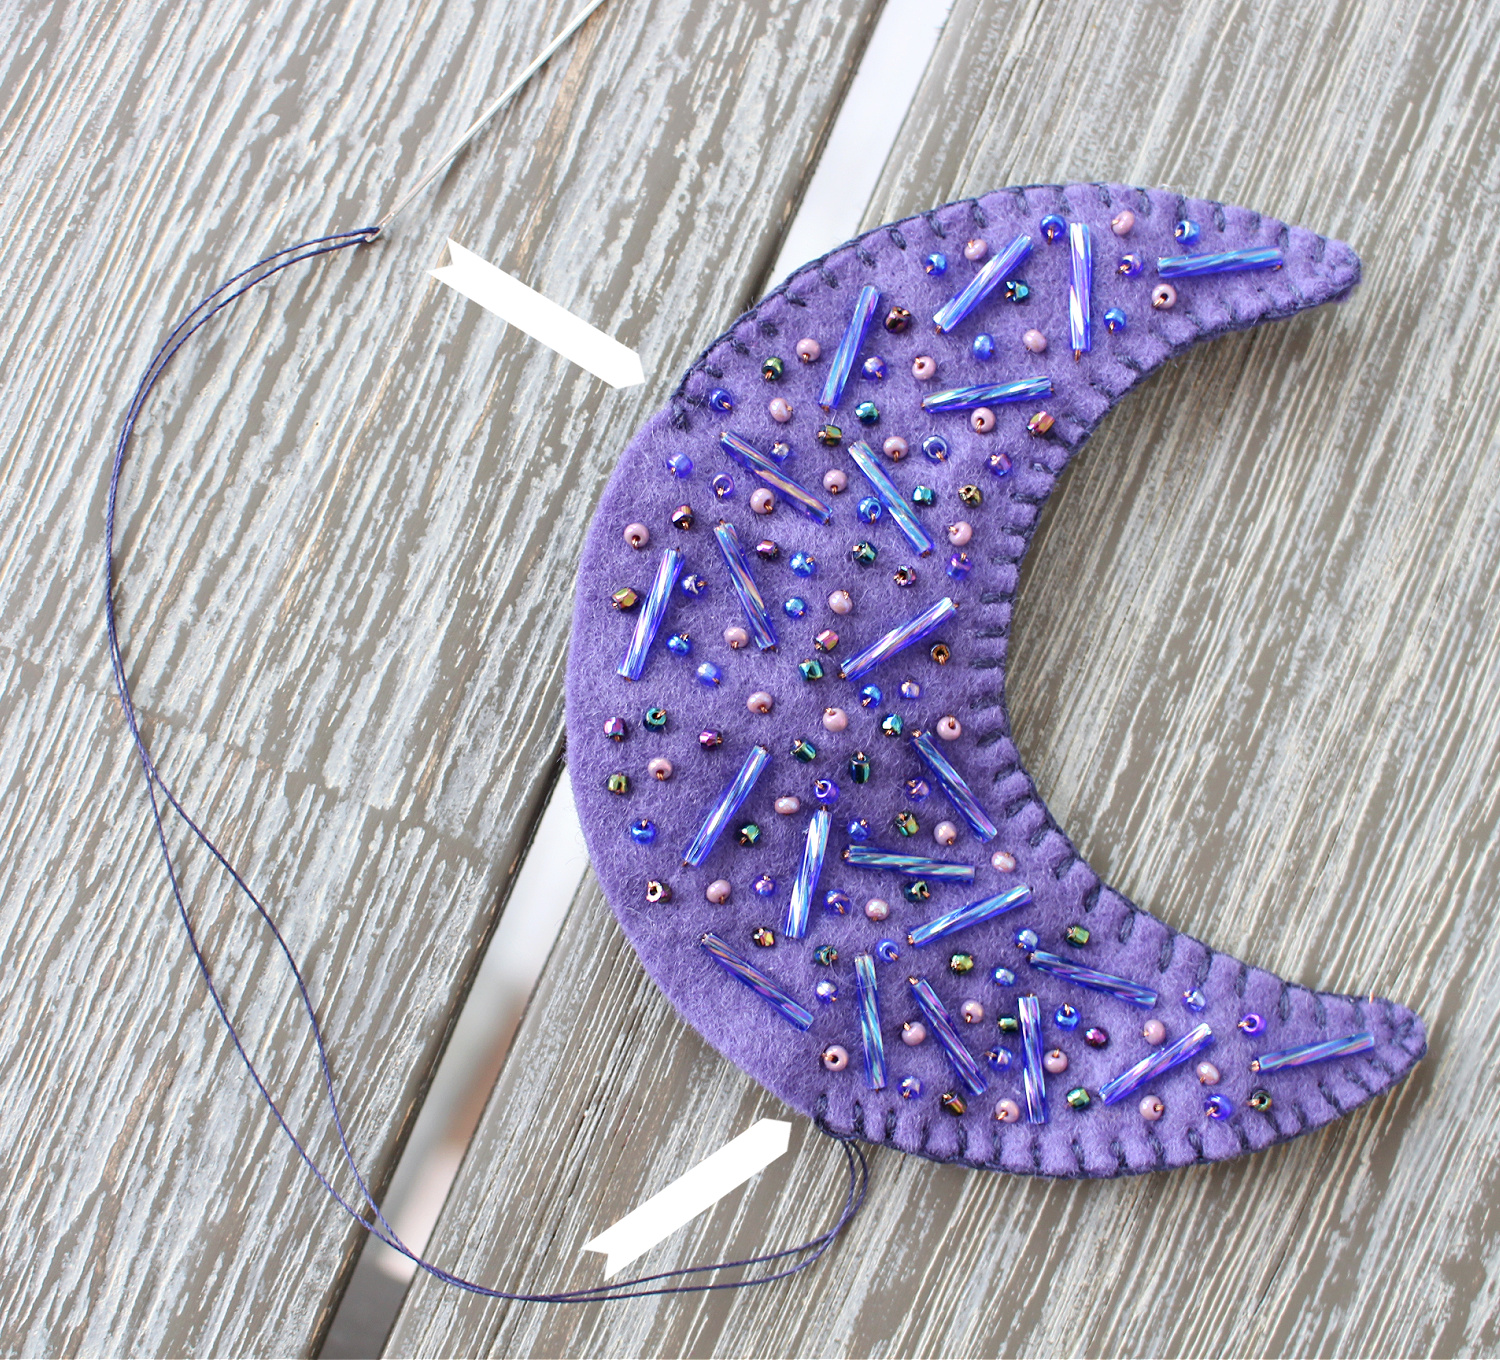 How to Hand Stitch a Felt Ornament